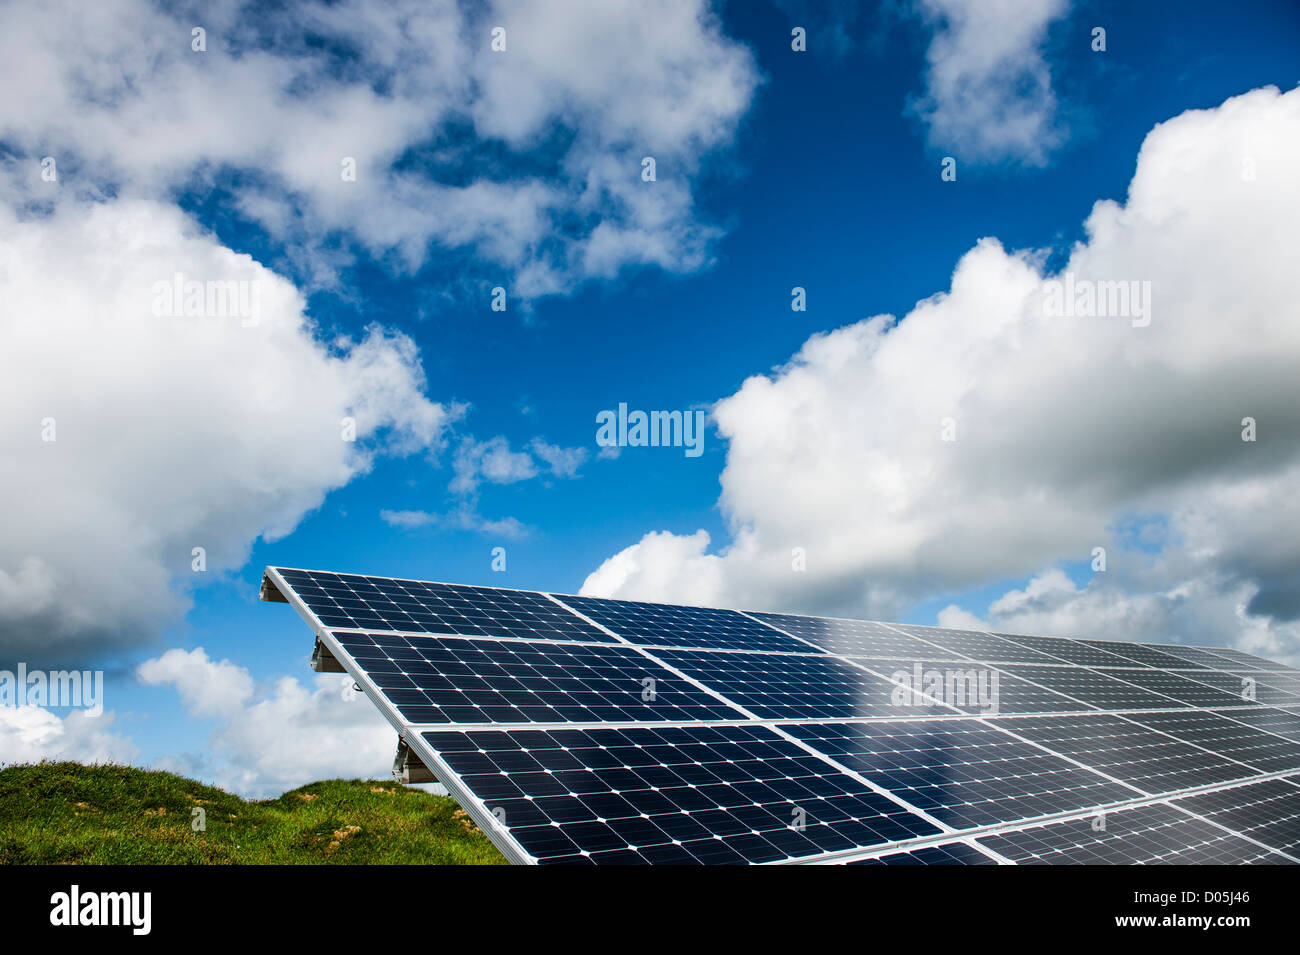 Green renewable energy: An array of solar panels converting sunshine into electricity, UK Stock Photo